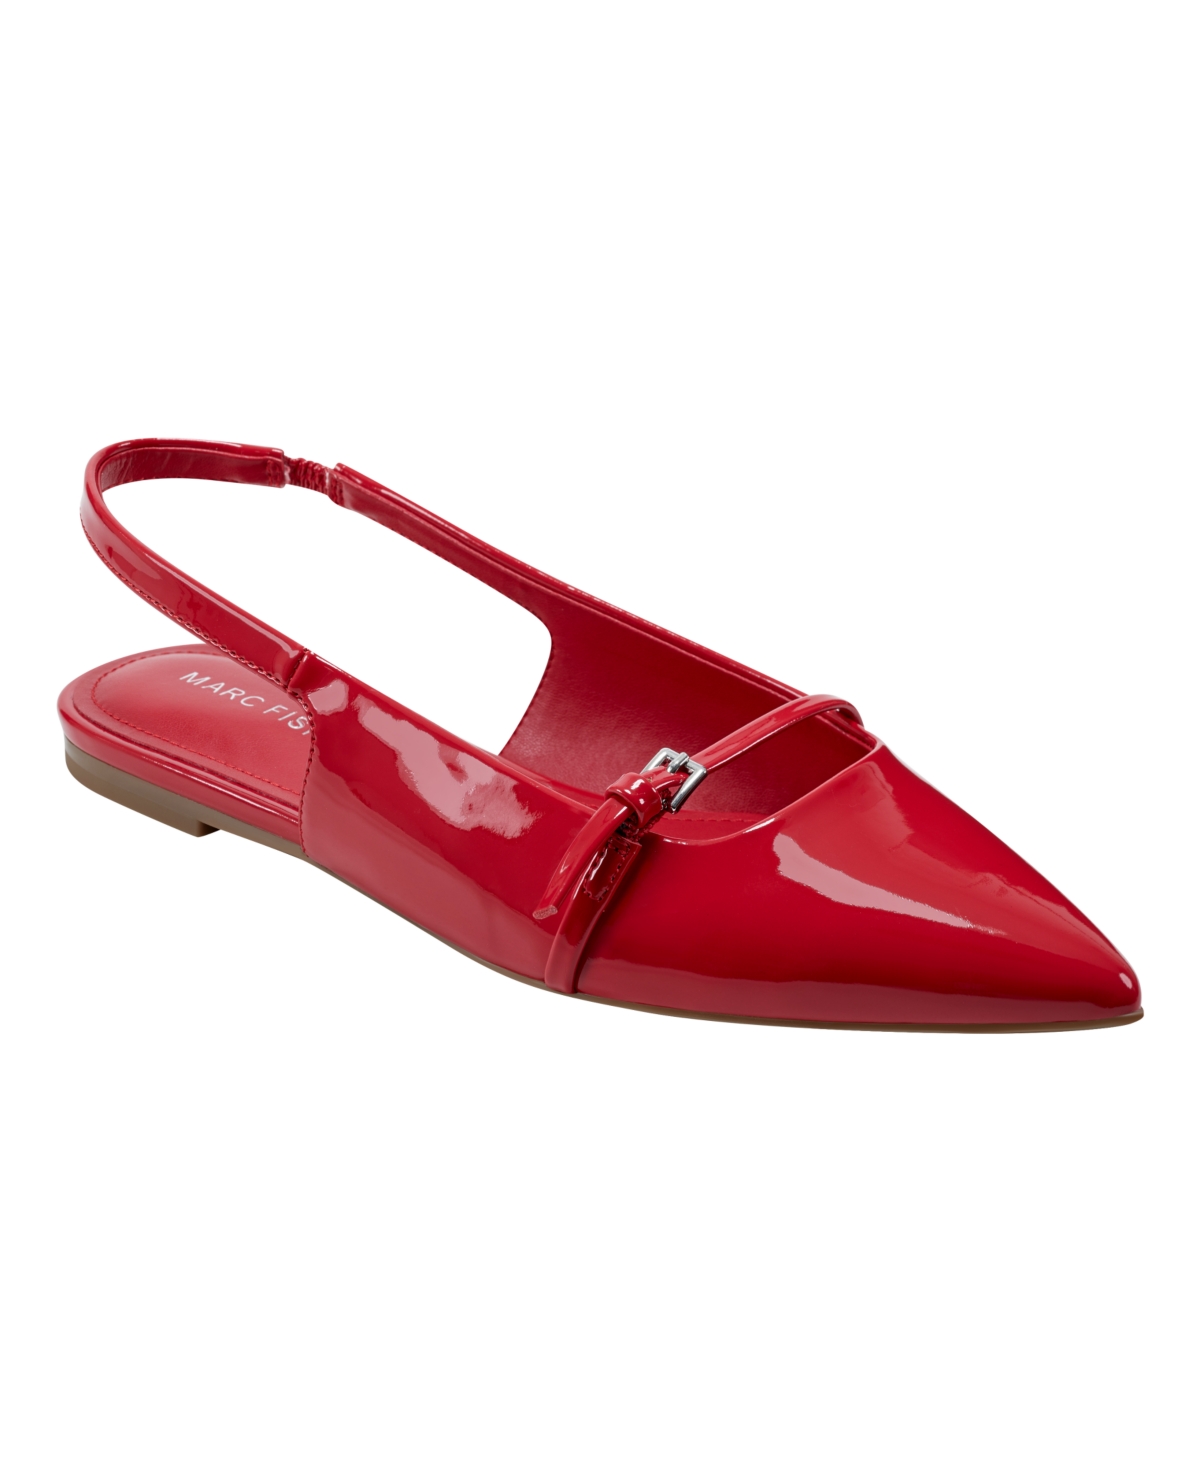 Women's Elelyn Pointy Toe Slingback Dress Flats - Red Patent - Faux Patent Leather